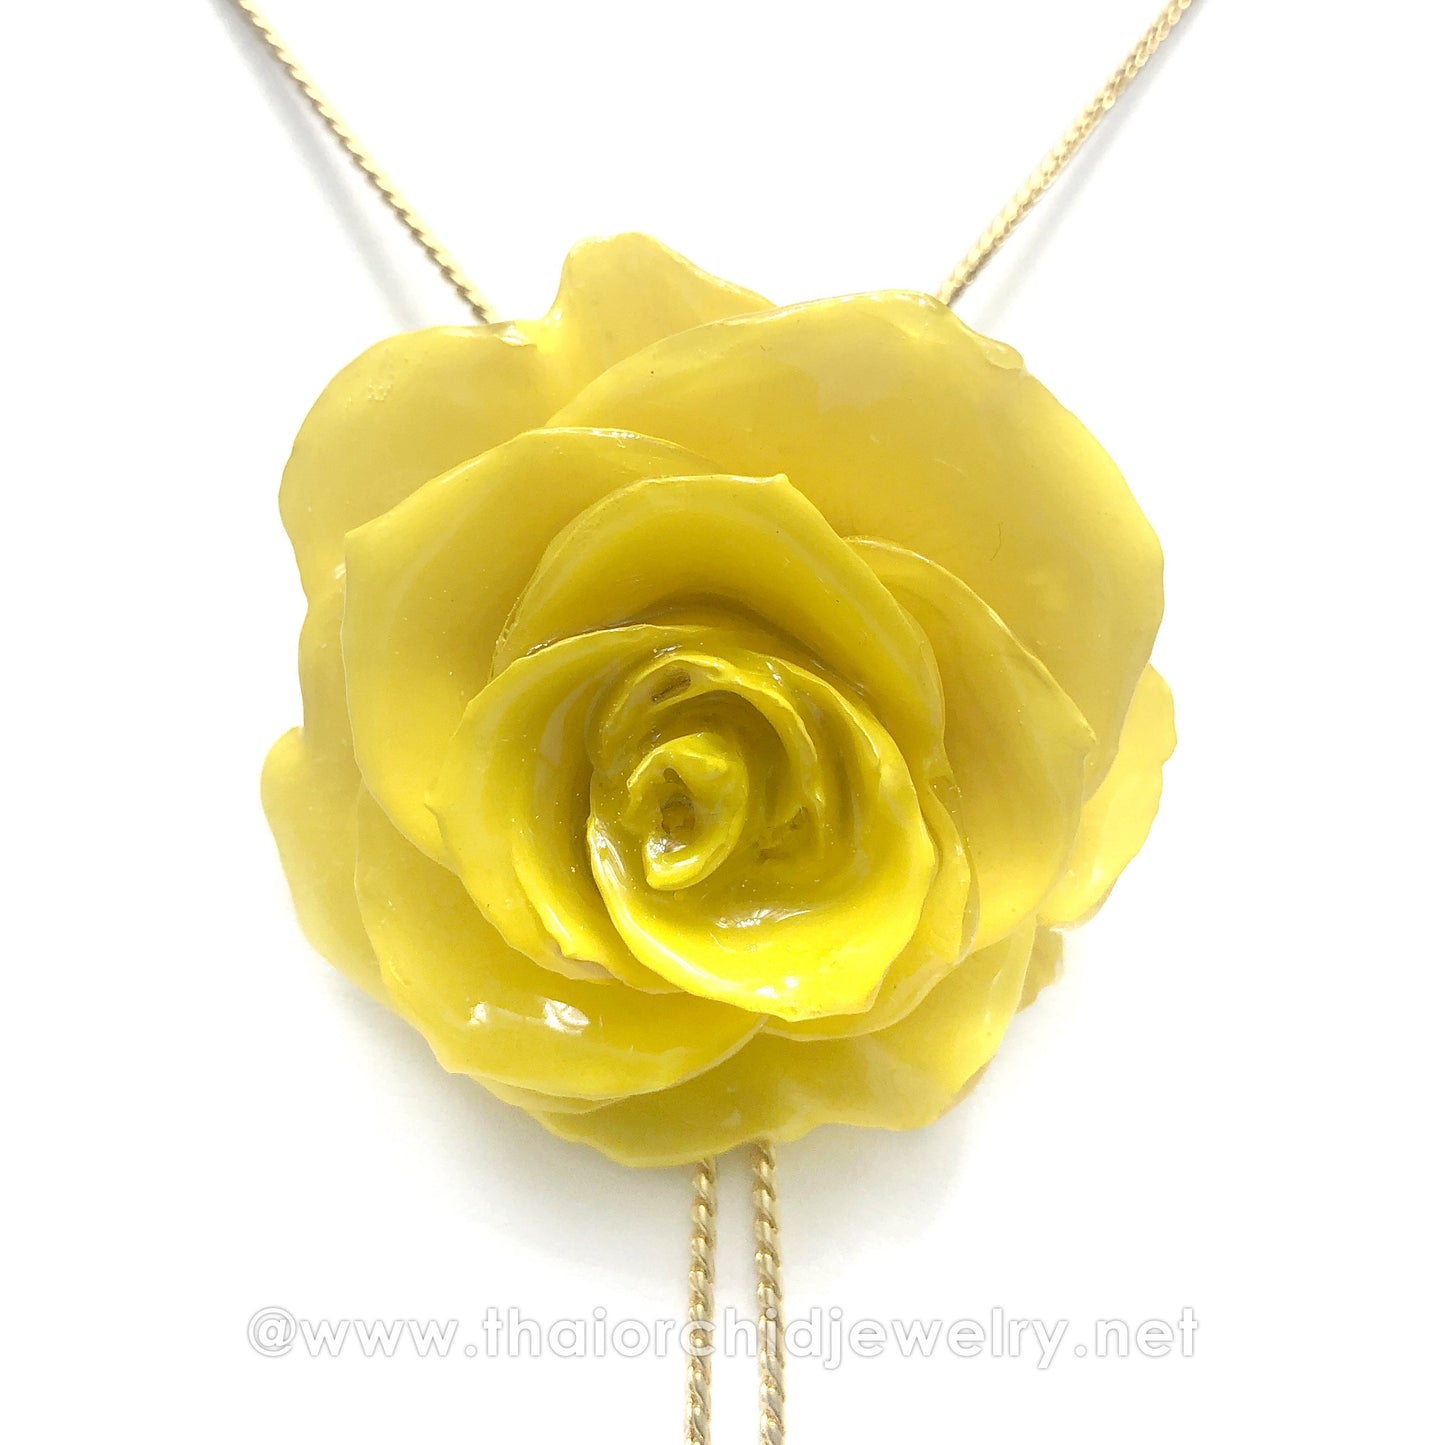 Mini Rose Mini 1.5-2.25 inch Pendant Necklace 18 inch Gold Plated 24K (Yellow)